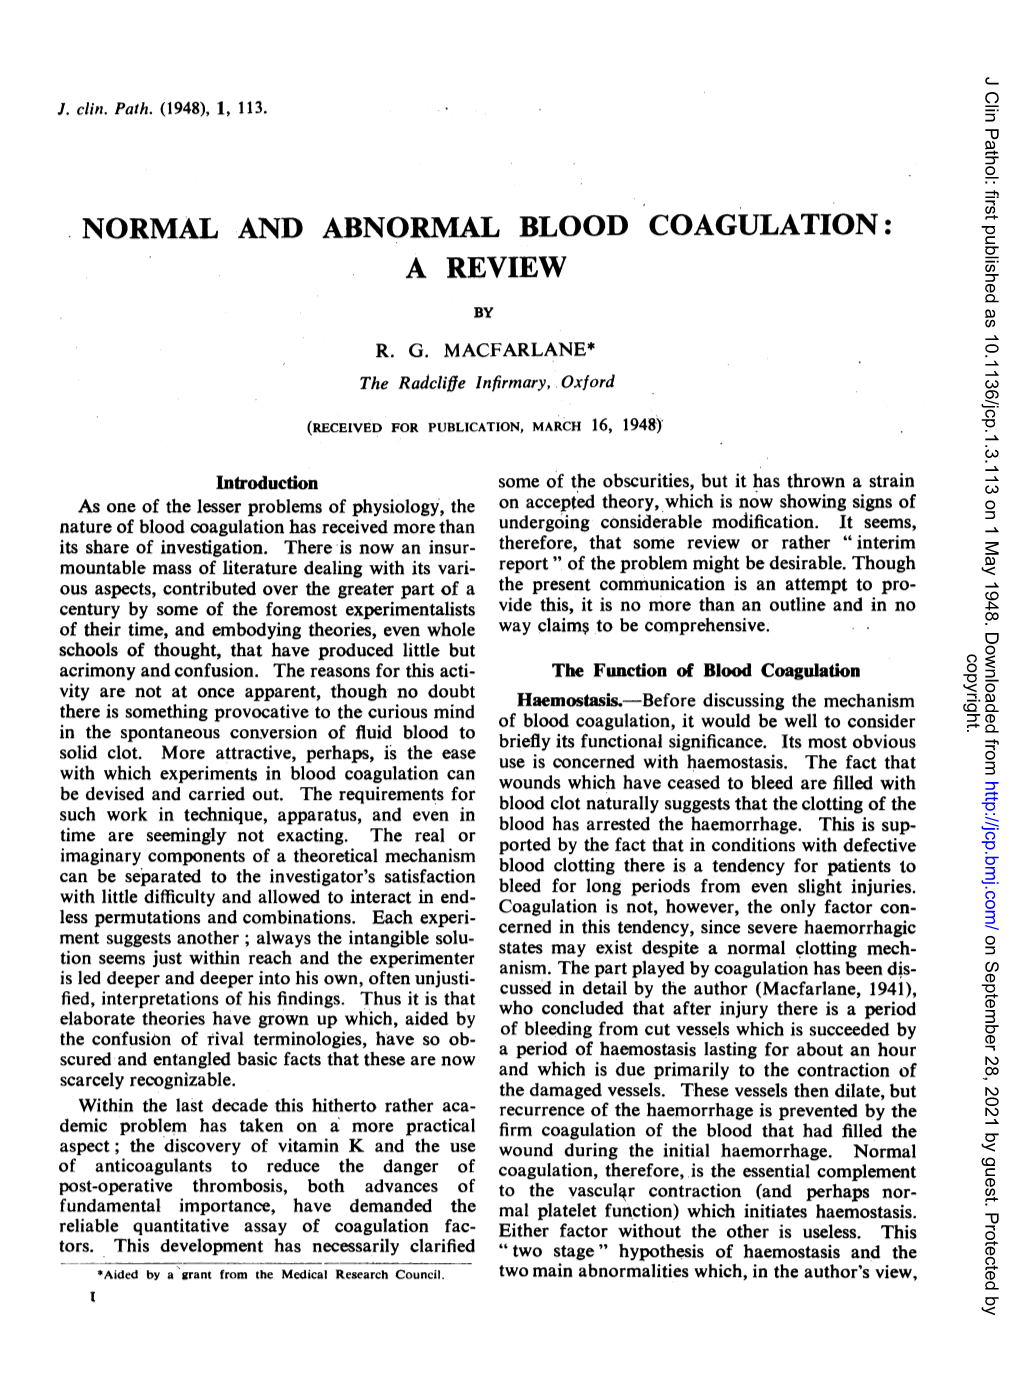 Normal and Abnormal Blood Coagulation: a Review by R